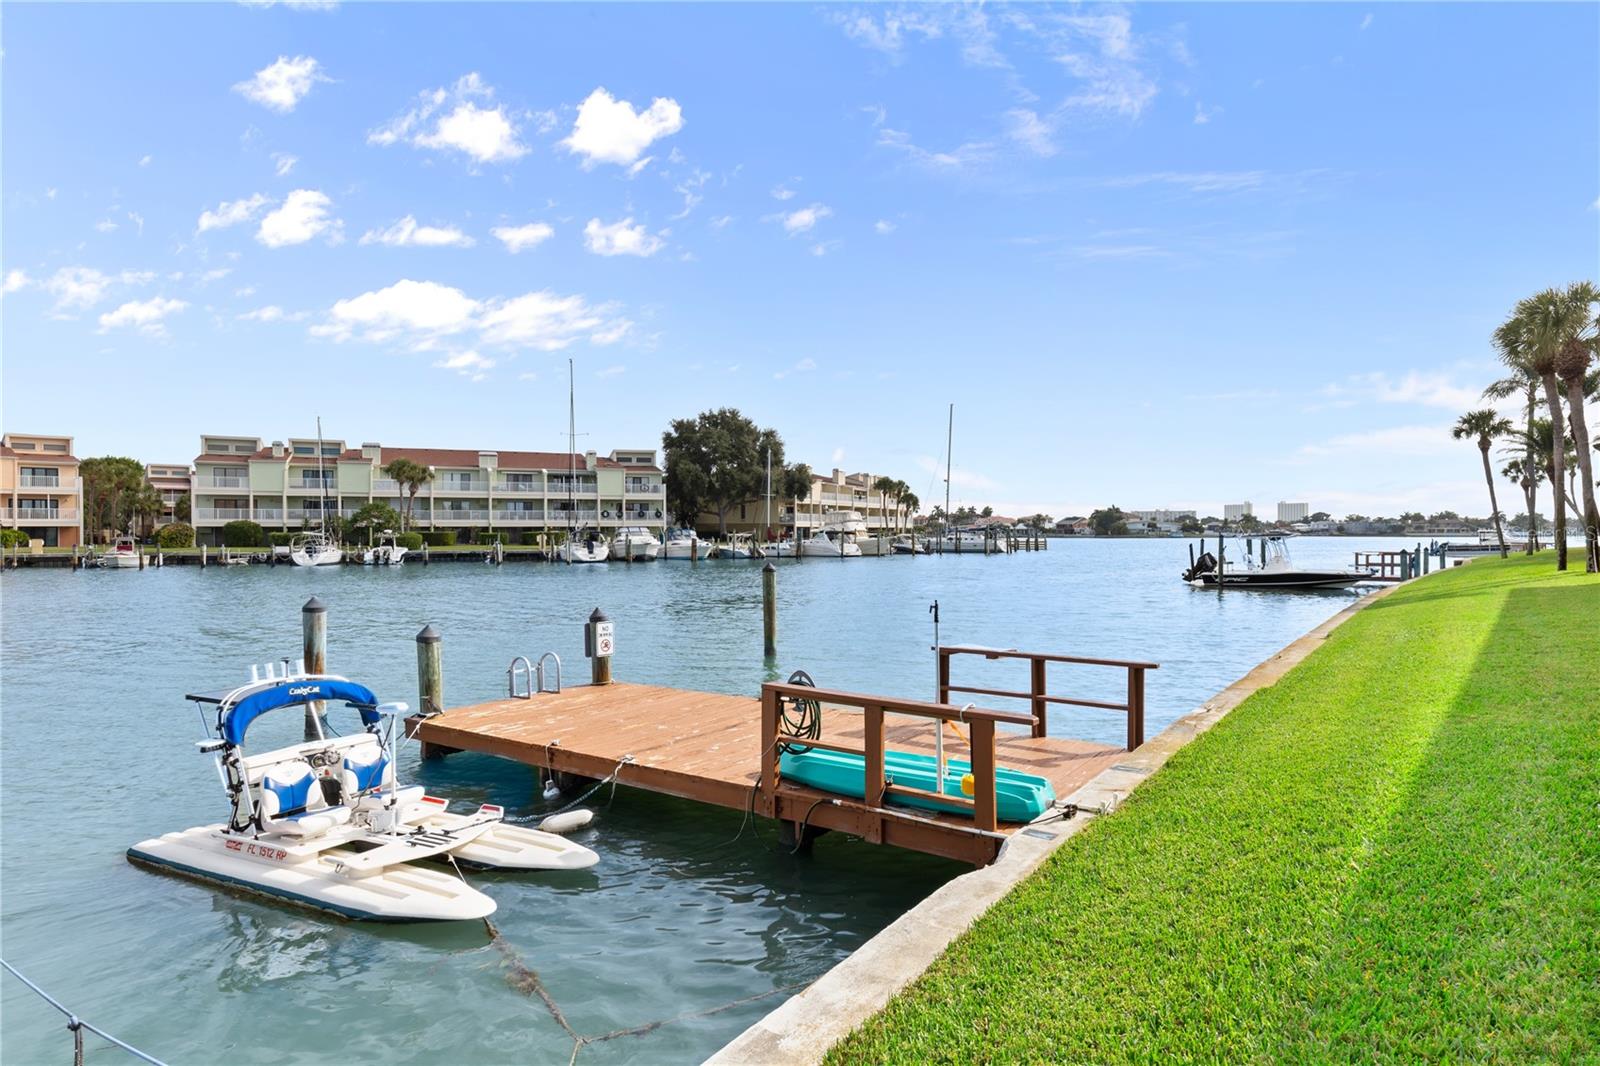 Community owned boat dock. Rent through the association. There is currently a waiting list.